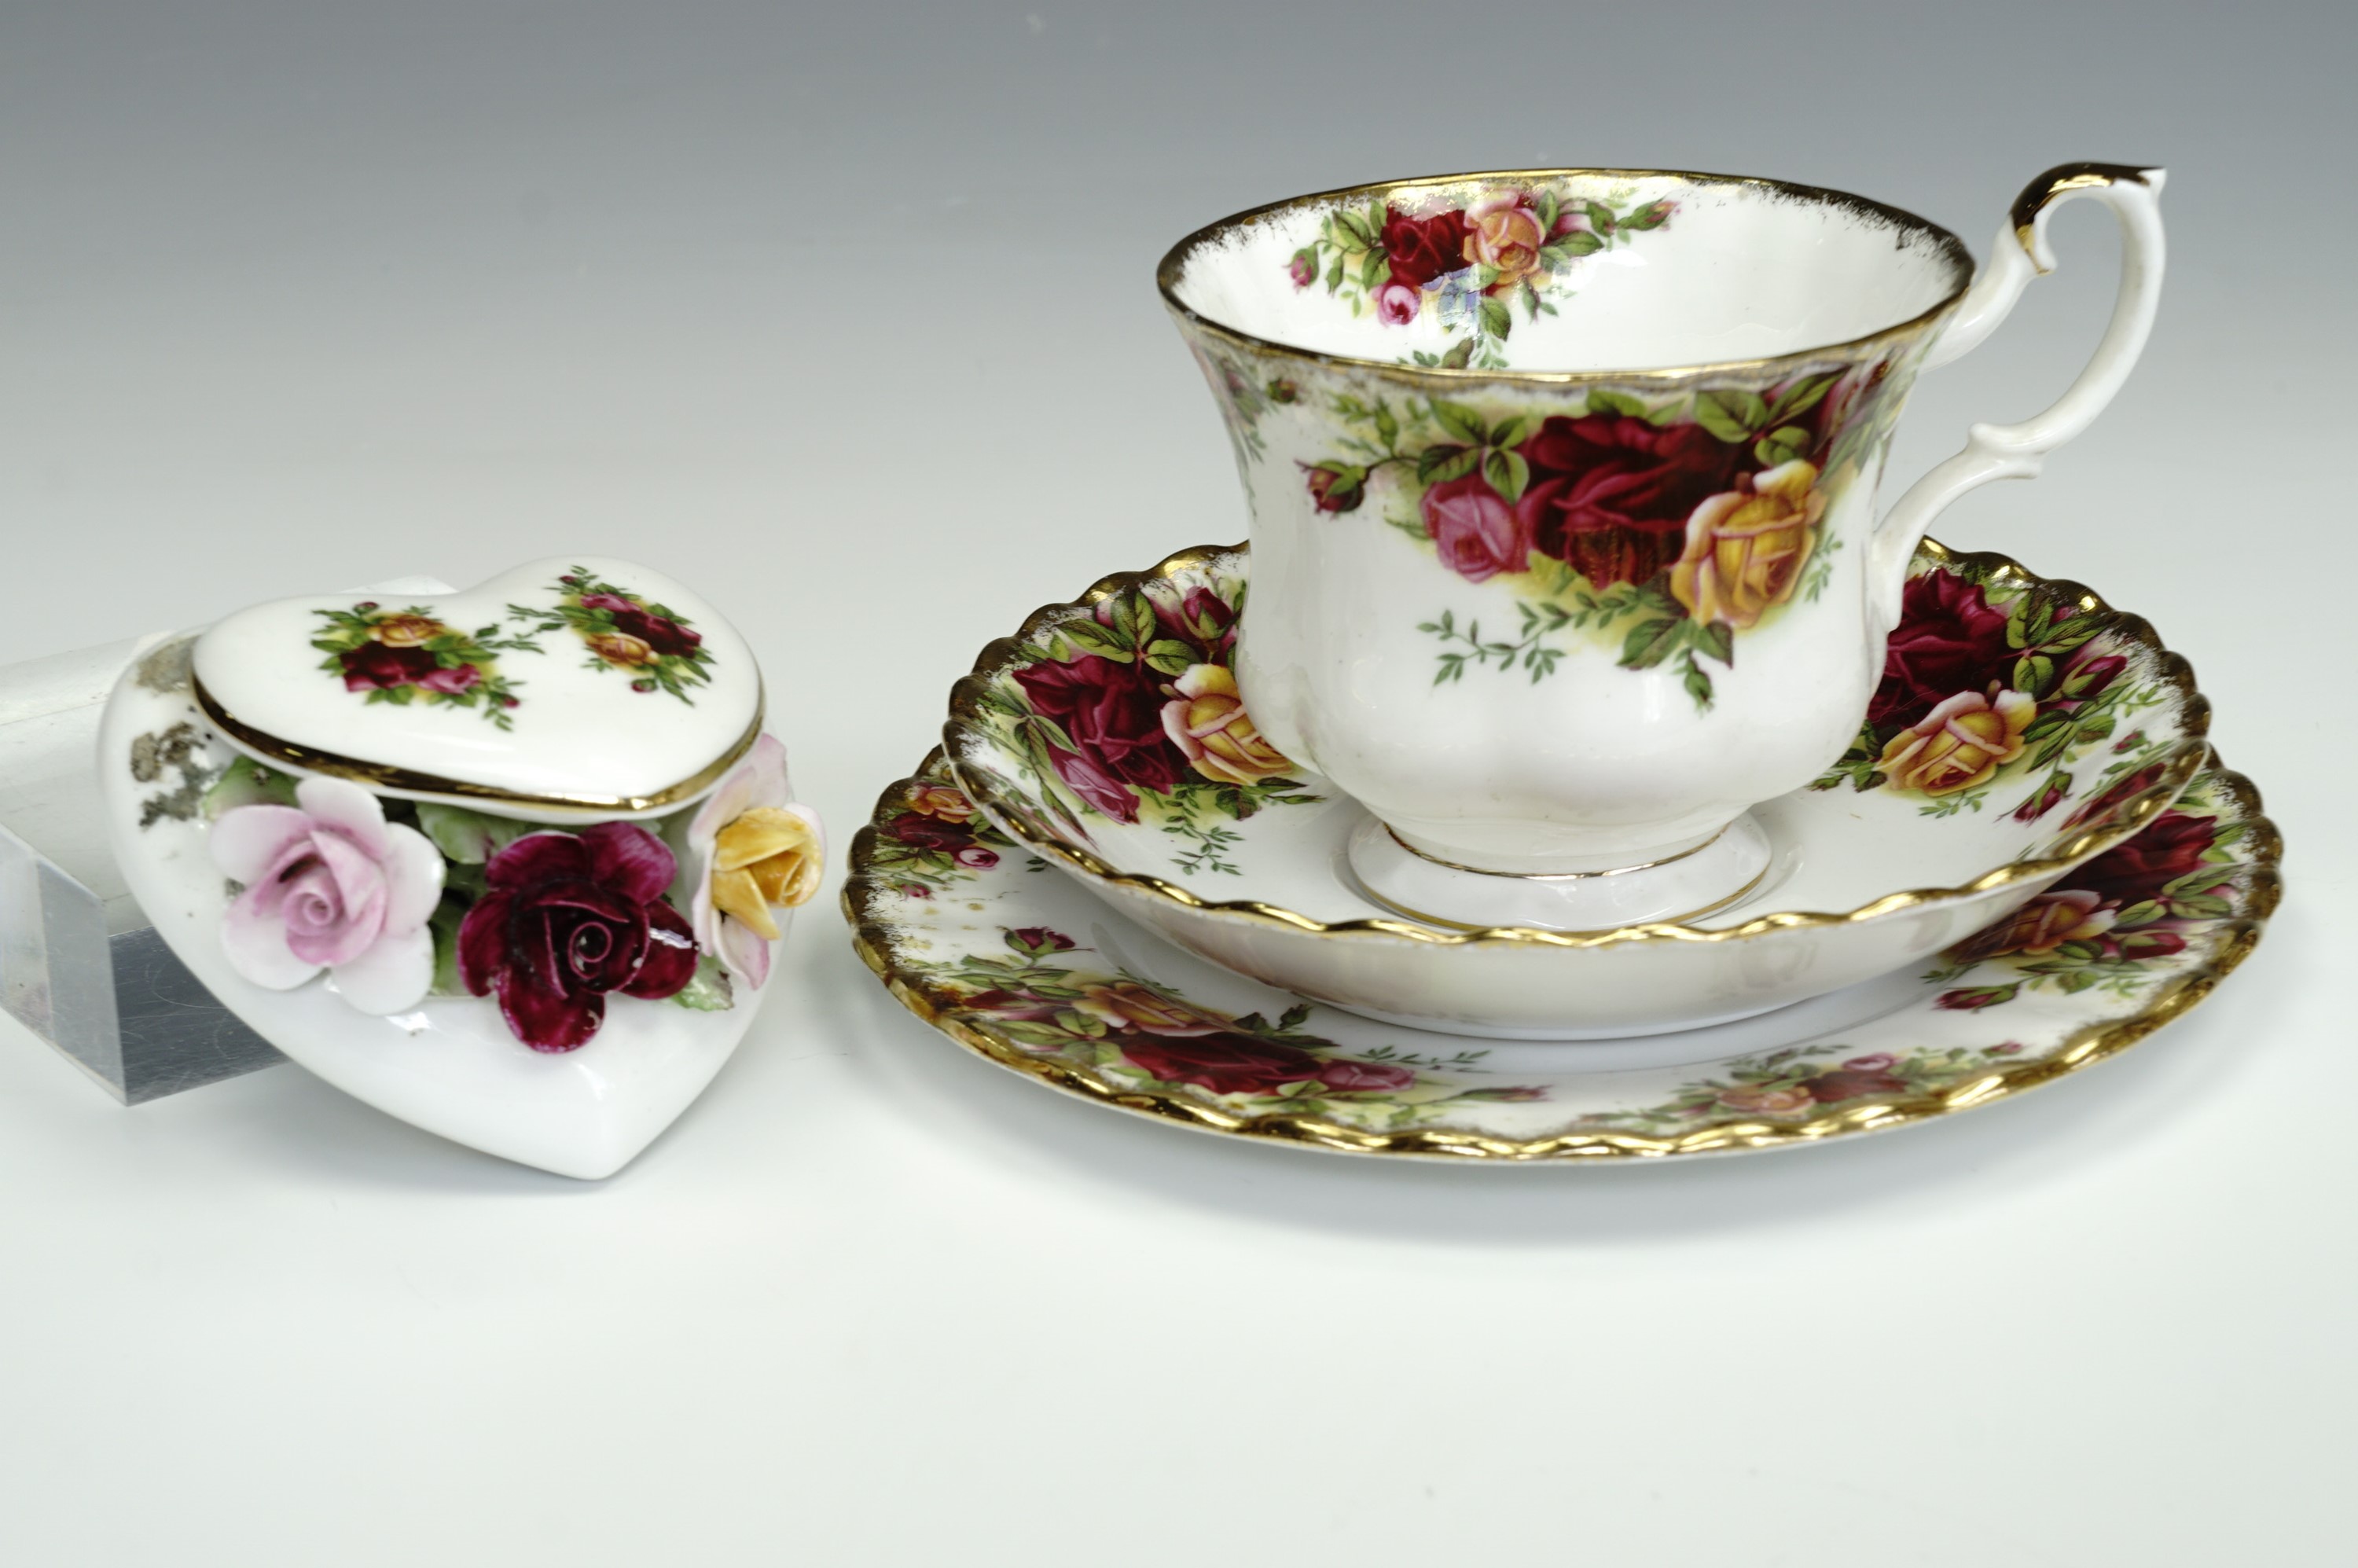 A Royal Albert 'Old Country Roses' cup, saucer and plate together with a matching heart and roses